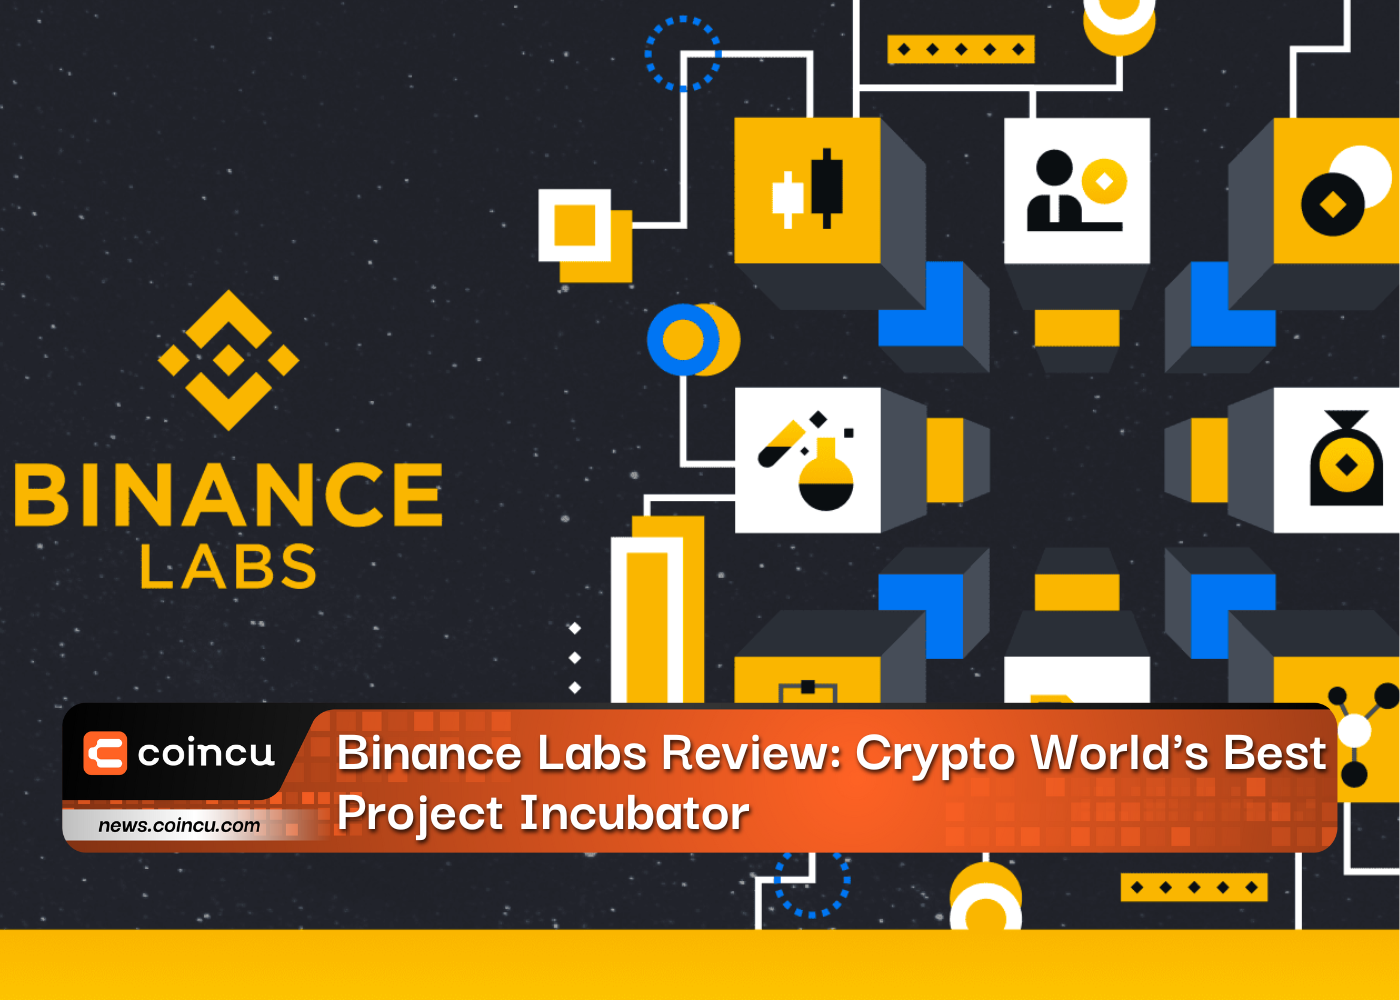 Binance Labs Review: Crypto World's Best Project Incubator